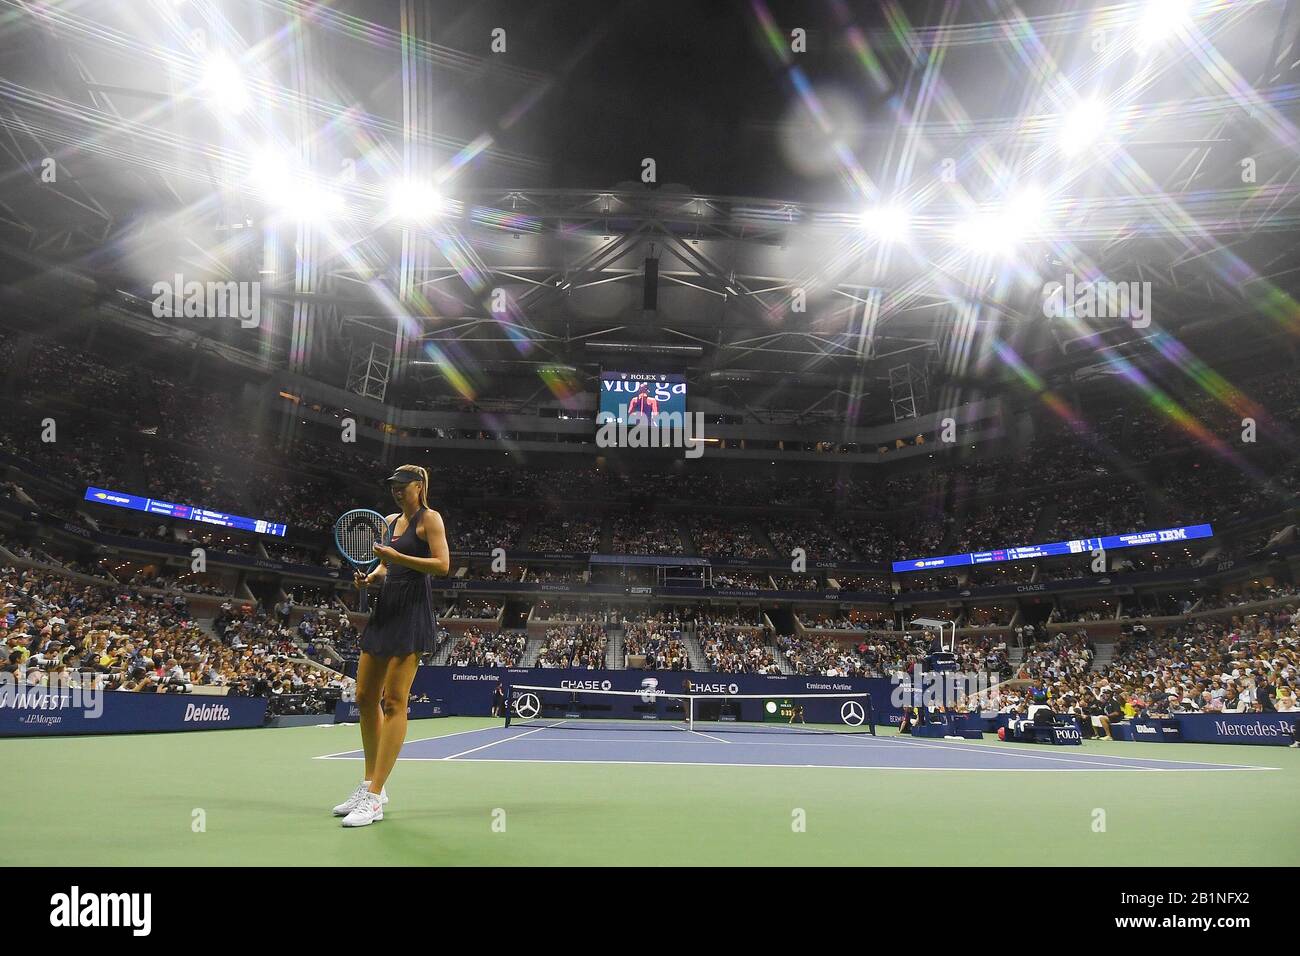 New York, USA. 26th Aug, 2019. Flushing Meadows New York US Open Tennis  26/08/2019 Alone with her throughts, Maria Sharapova during facile defeat  by Serena Williams (USA) 6-1, 6-1 victory over Maria